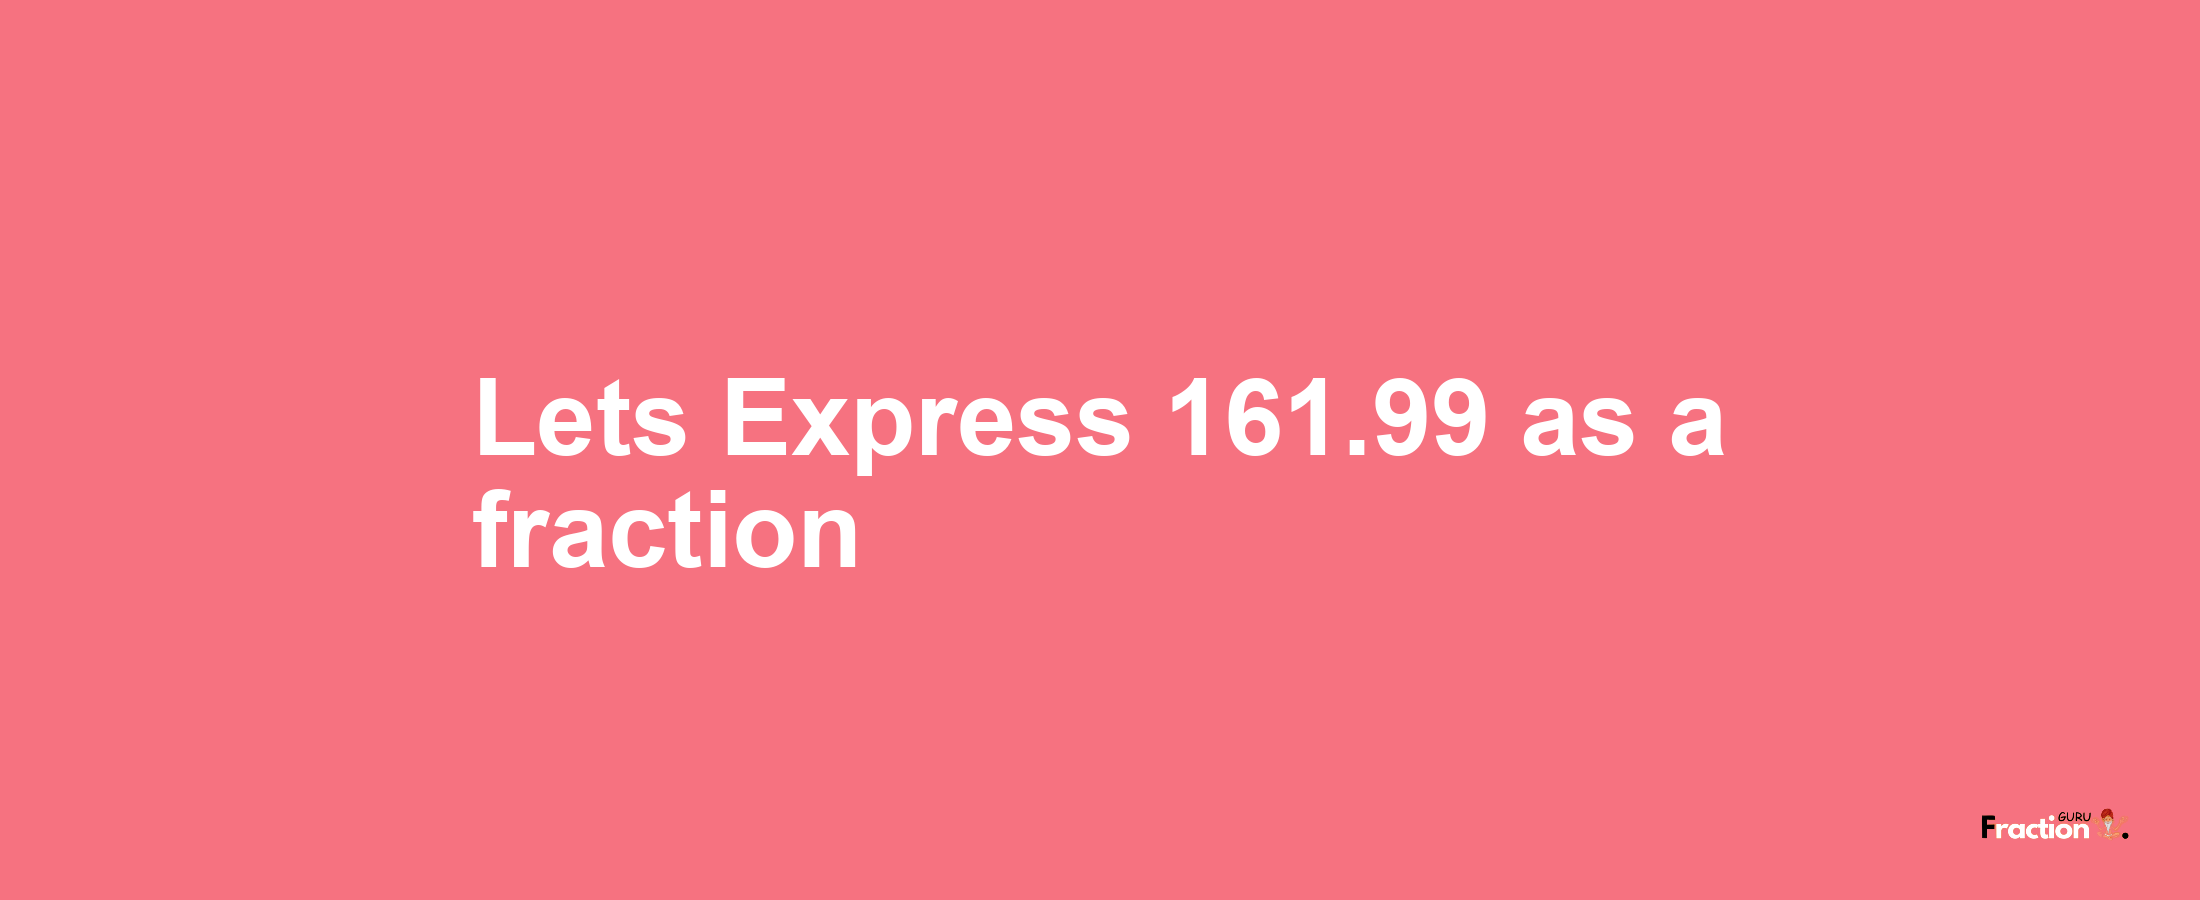 Lets Express 161.99 as afraction